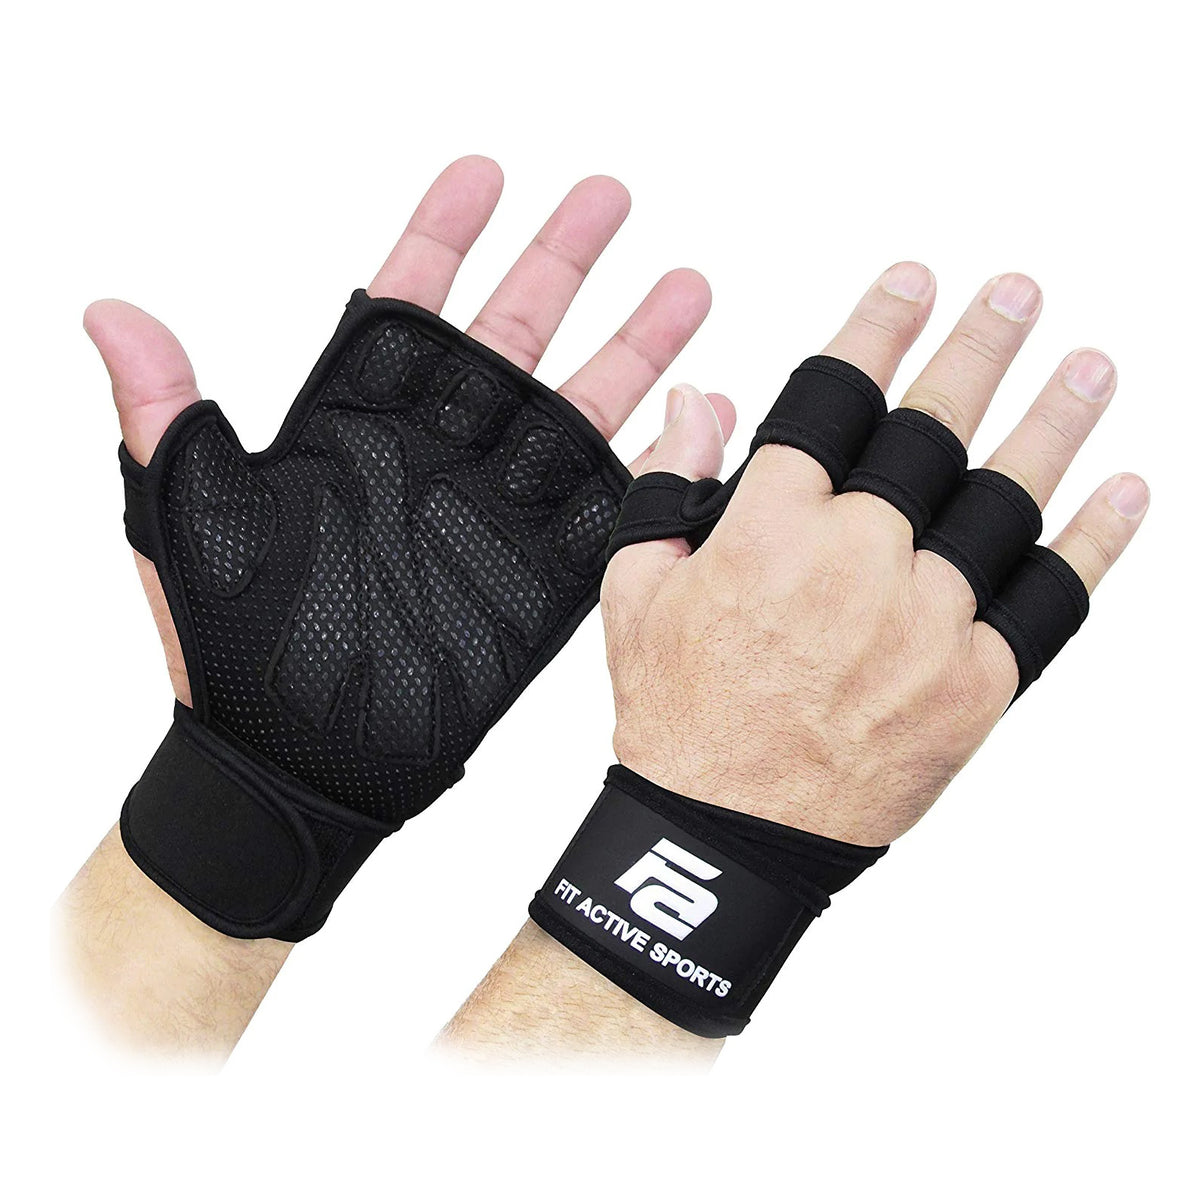 New Ventilated Weight Lifting Workout Gloves with Built-in Wrist Wraps for Men and Women - Great for Gym Fitness, Cross Training, Hand Support & Weightlifting. extra small